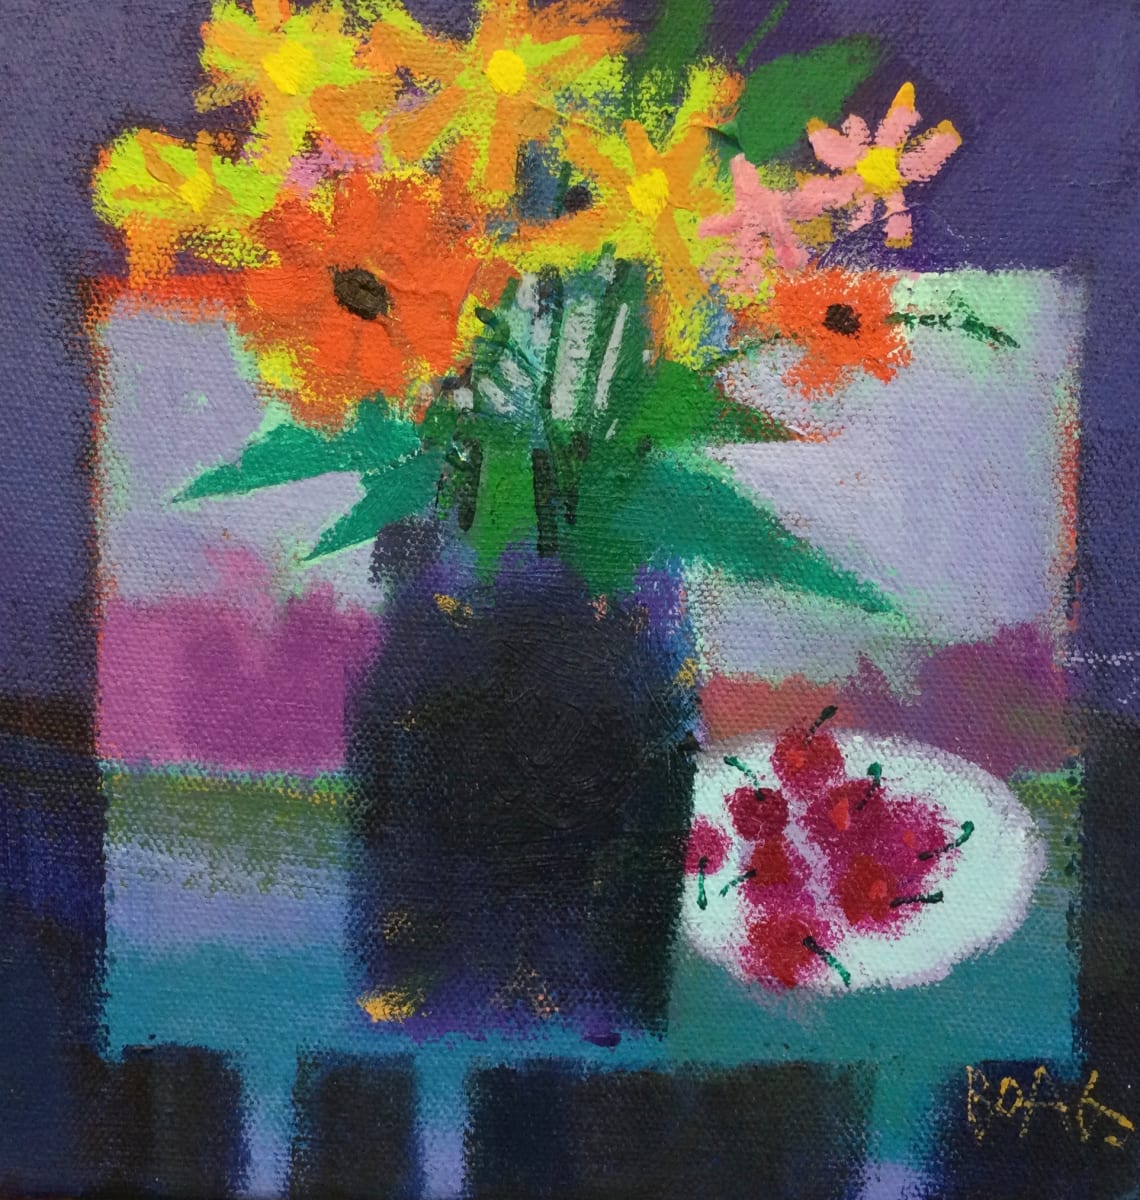 Flowers and cherries by francis boag 